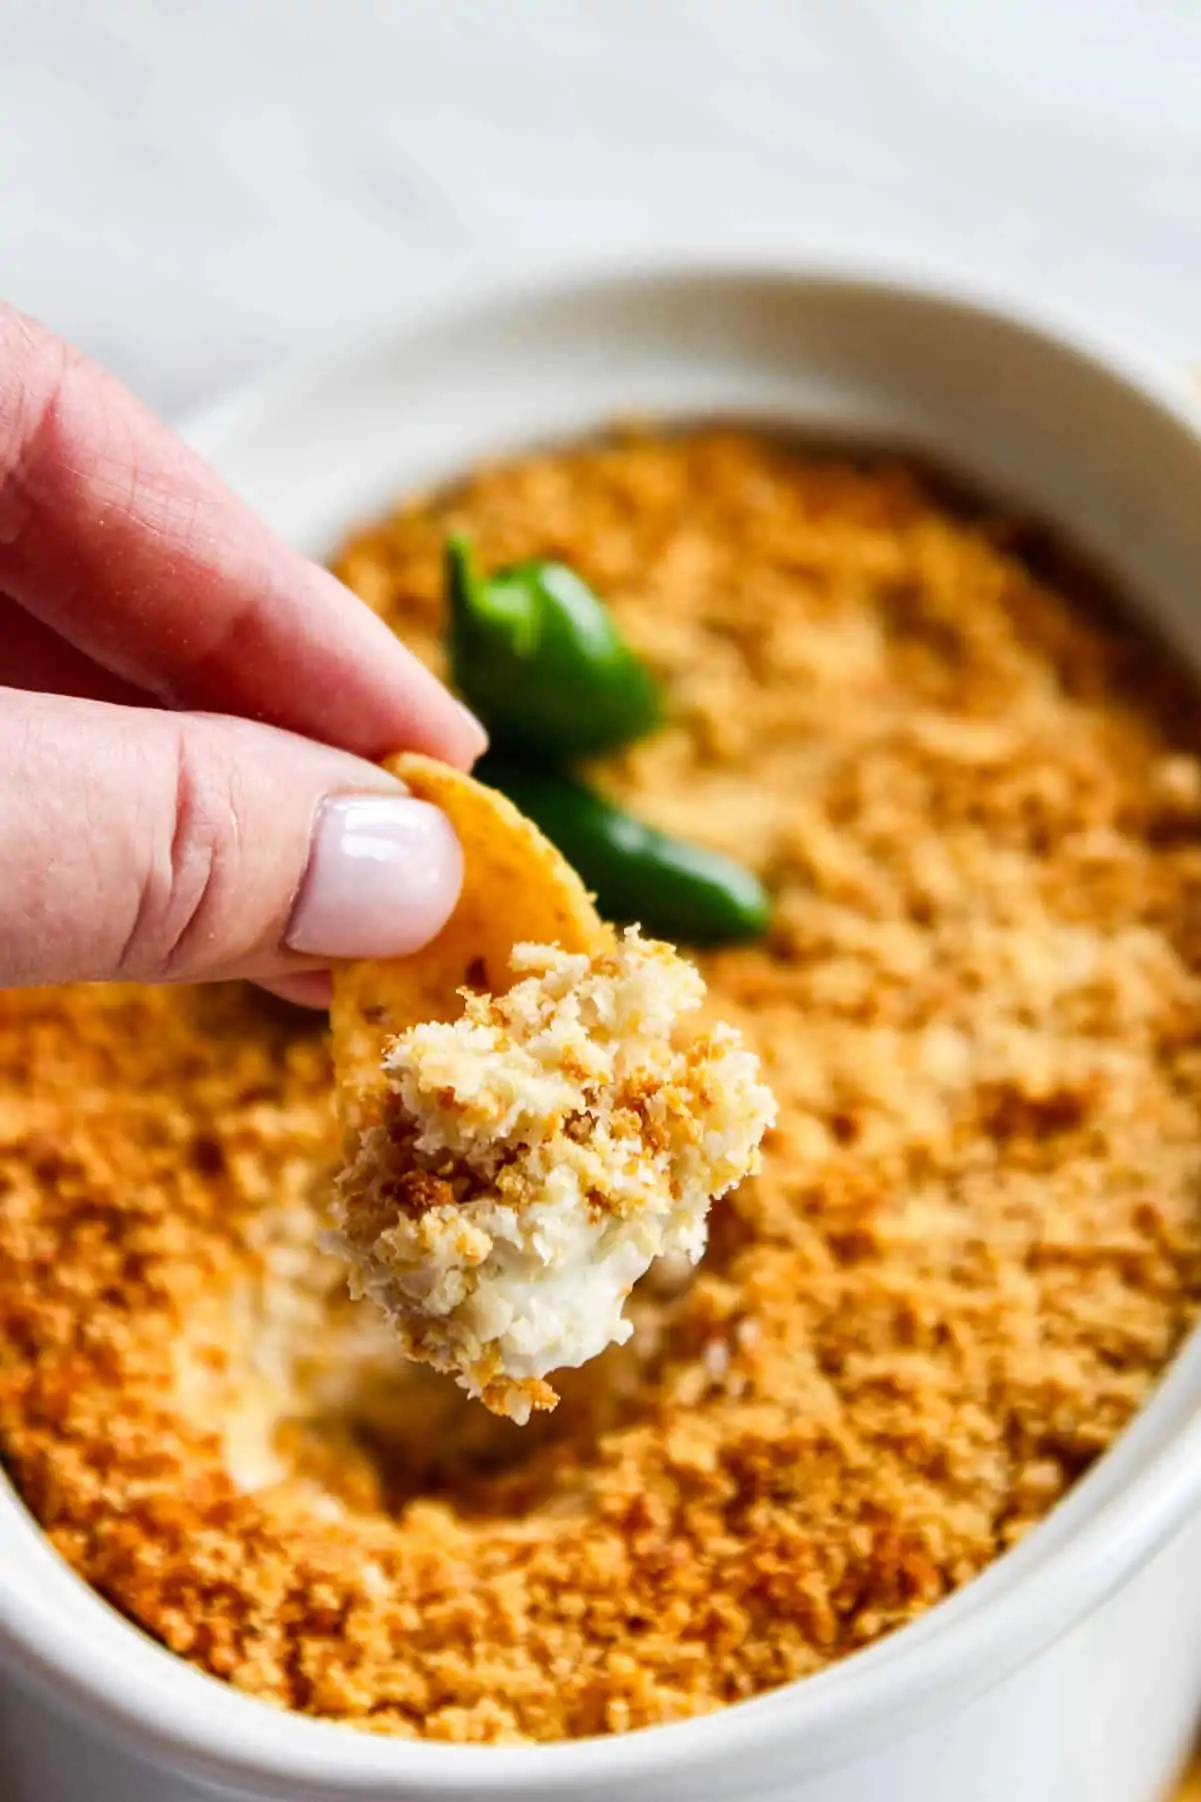 Scooping out a bite of hot dip from a white dish of freshly baked jalapeno popper dip.